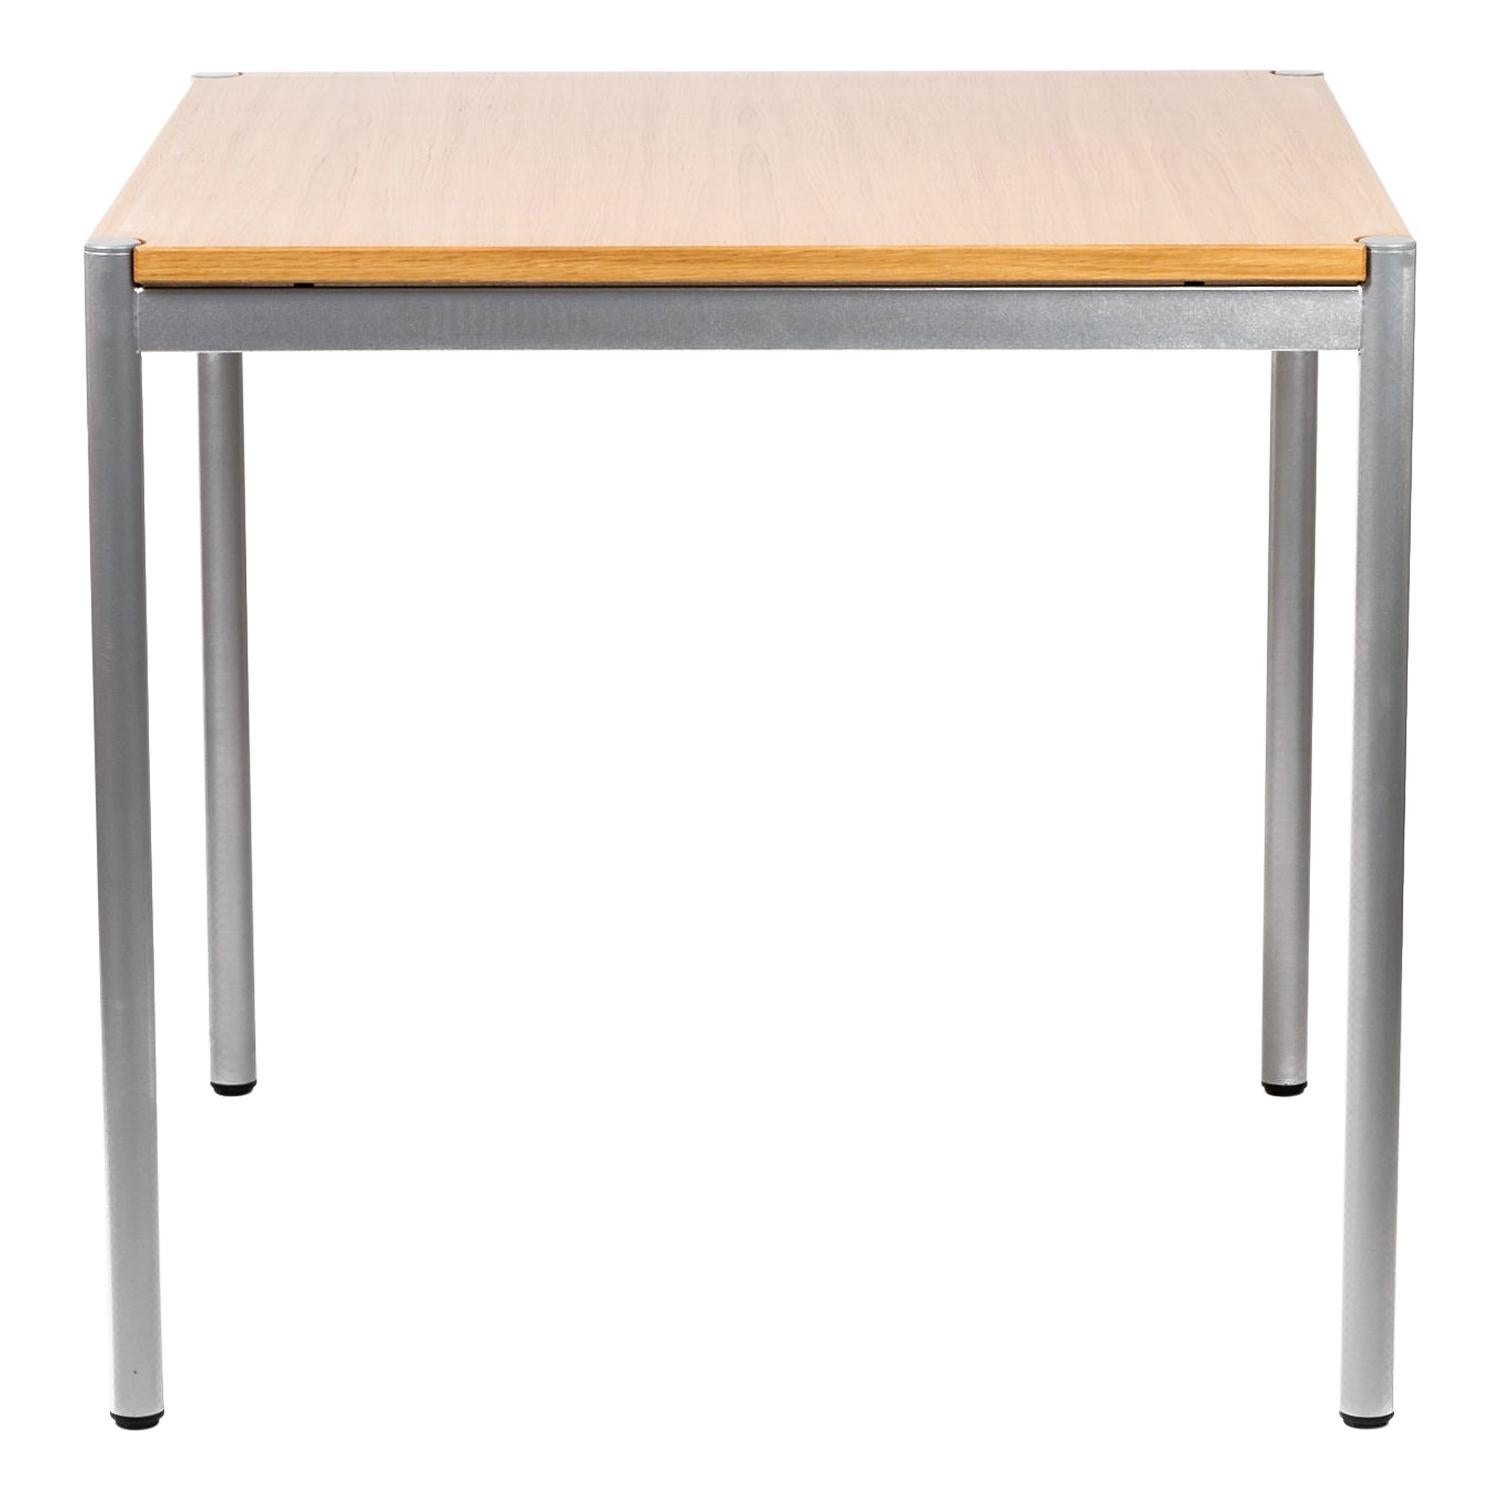 Dietiker Atos II Dining or Office table, by Edlef Bandixen in 1963, in Stock